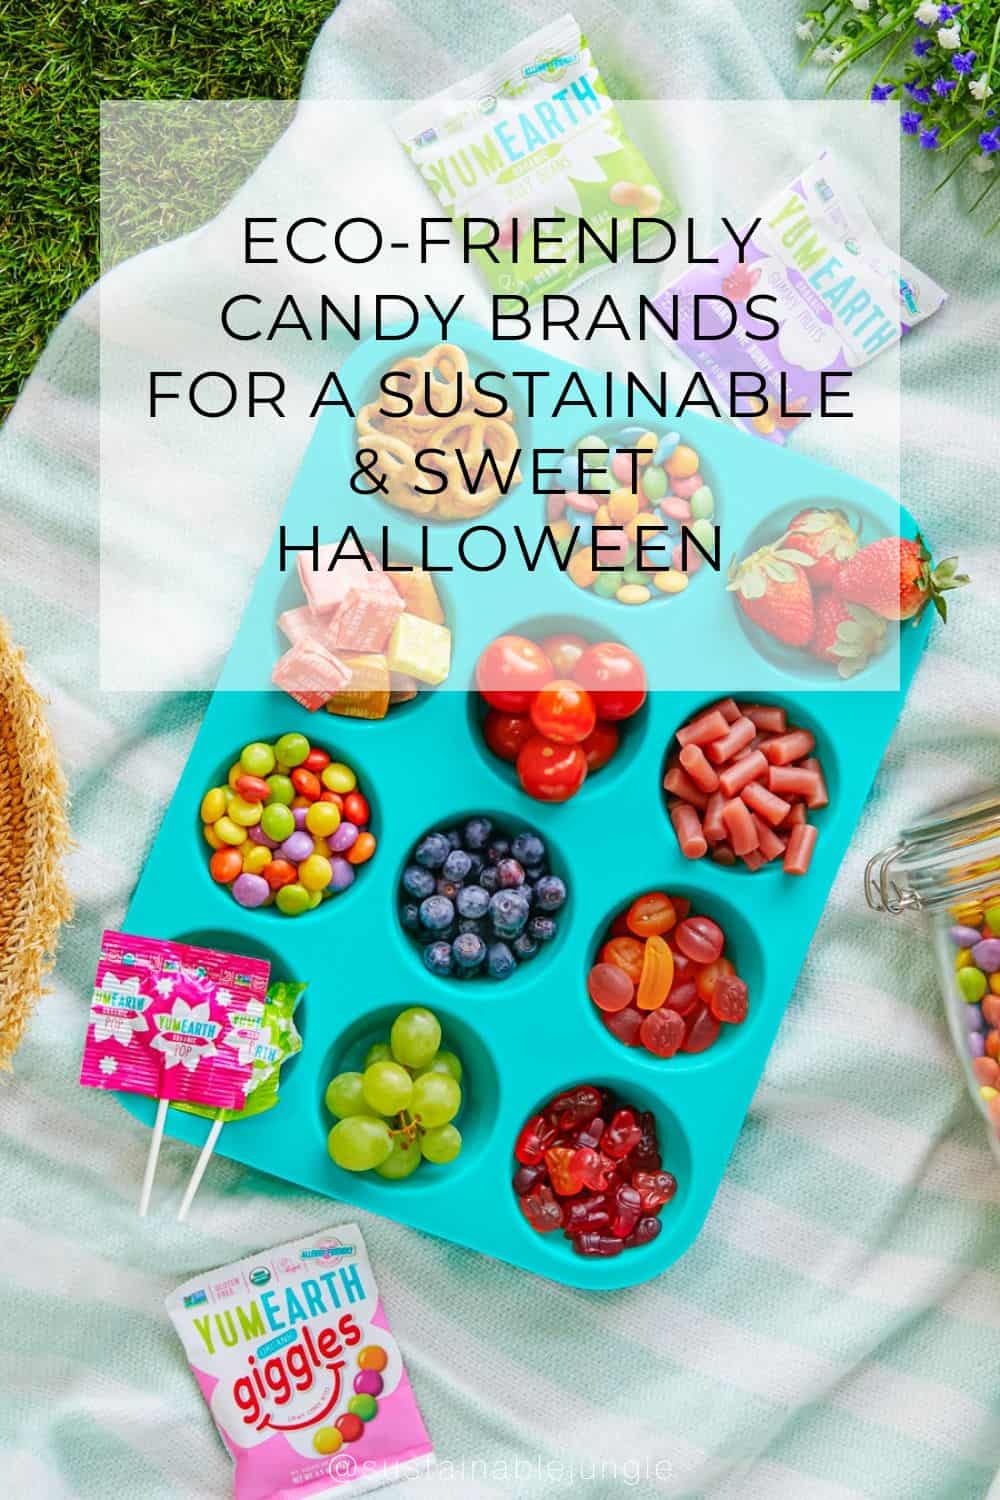 Eco-Friendly Candy Brands For A Sustainable & Sweet Halloween Image by YumEarth #ecofriendlycandy #ecofriendlyhalloweencandy #sustainablecandy #sustainablehalloweencandy #ecofriendlycandypackaging #sustainablecandywrappers #sustainablejungle